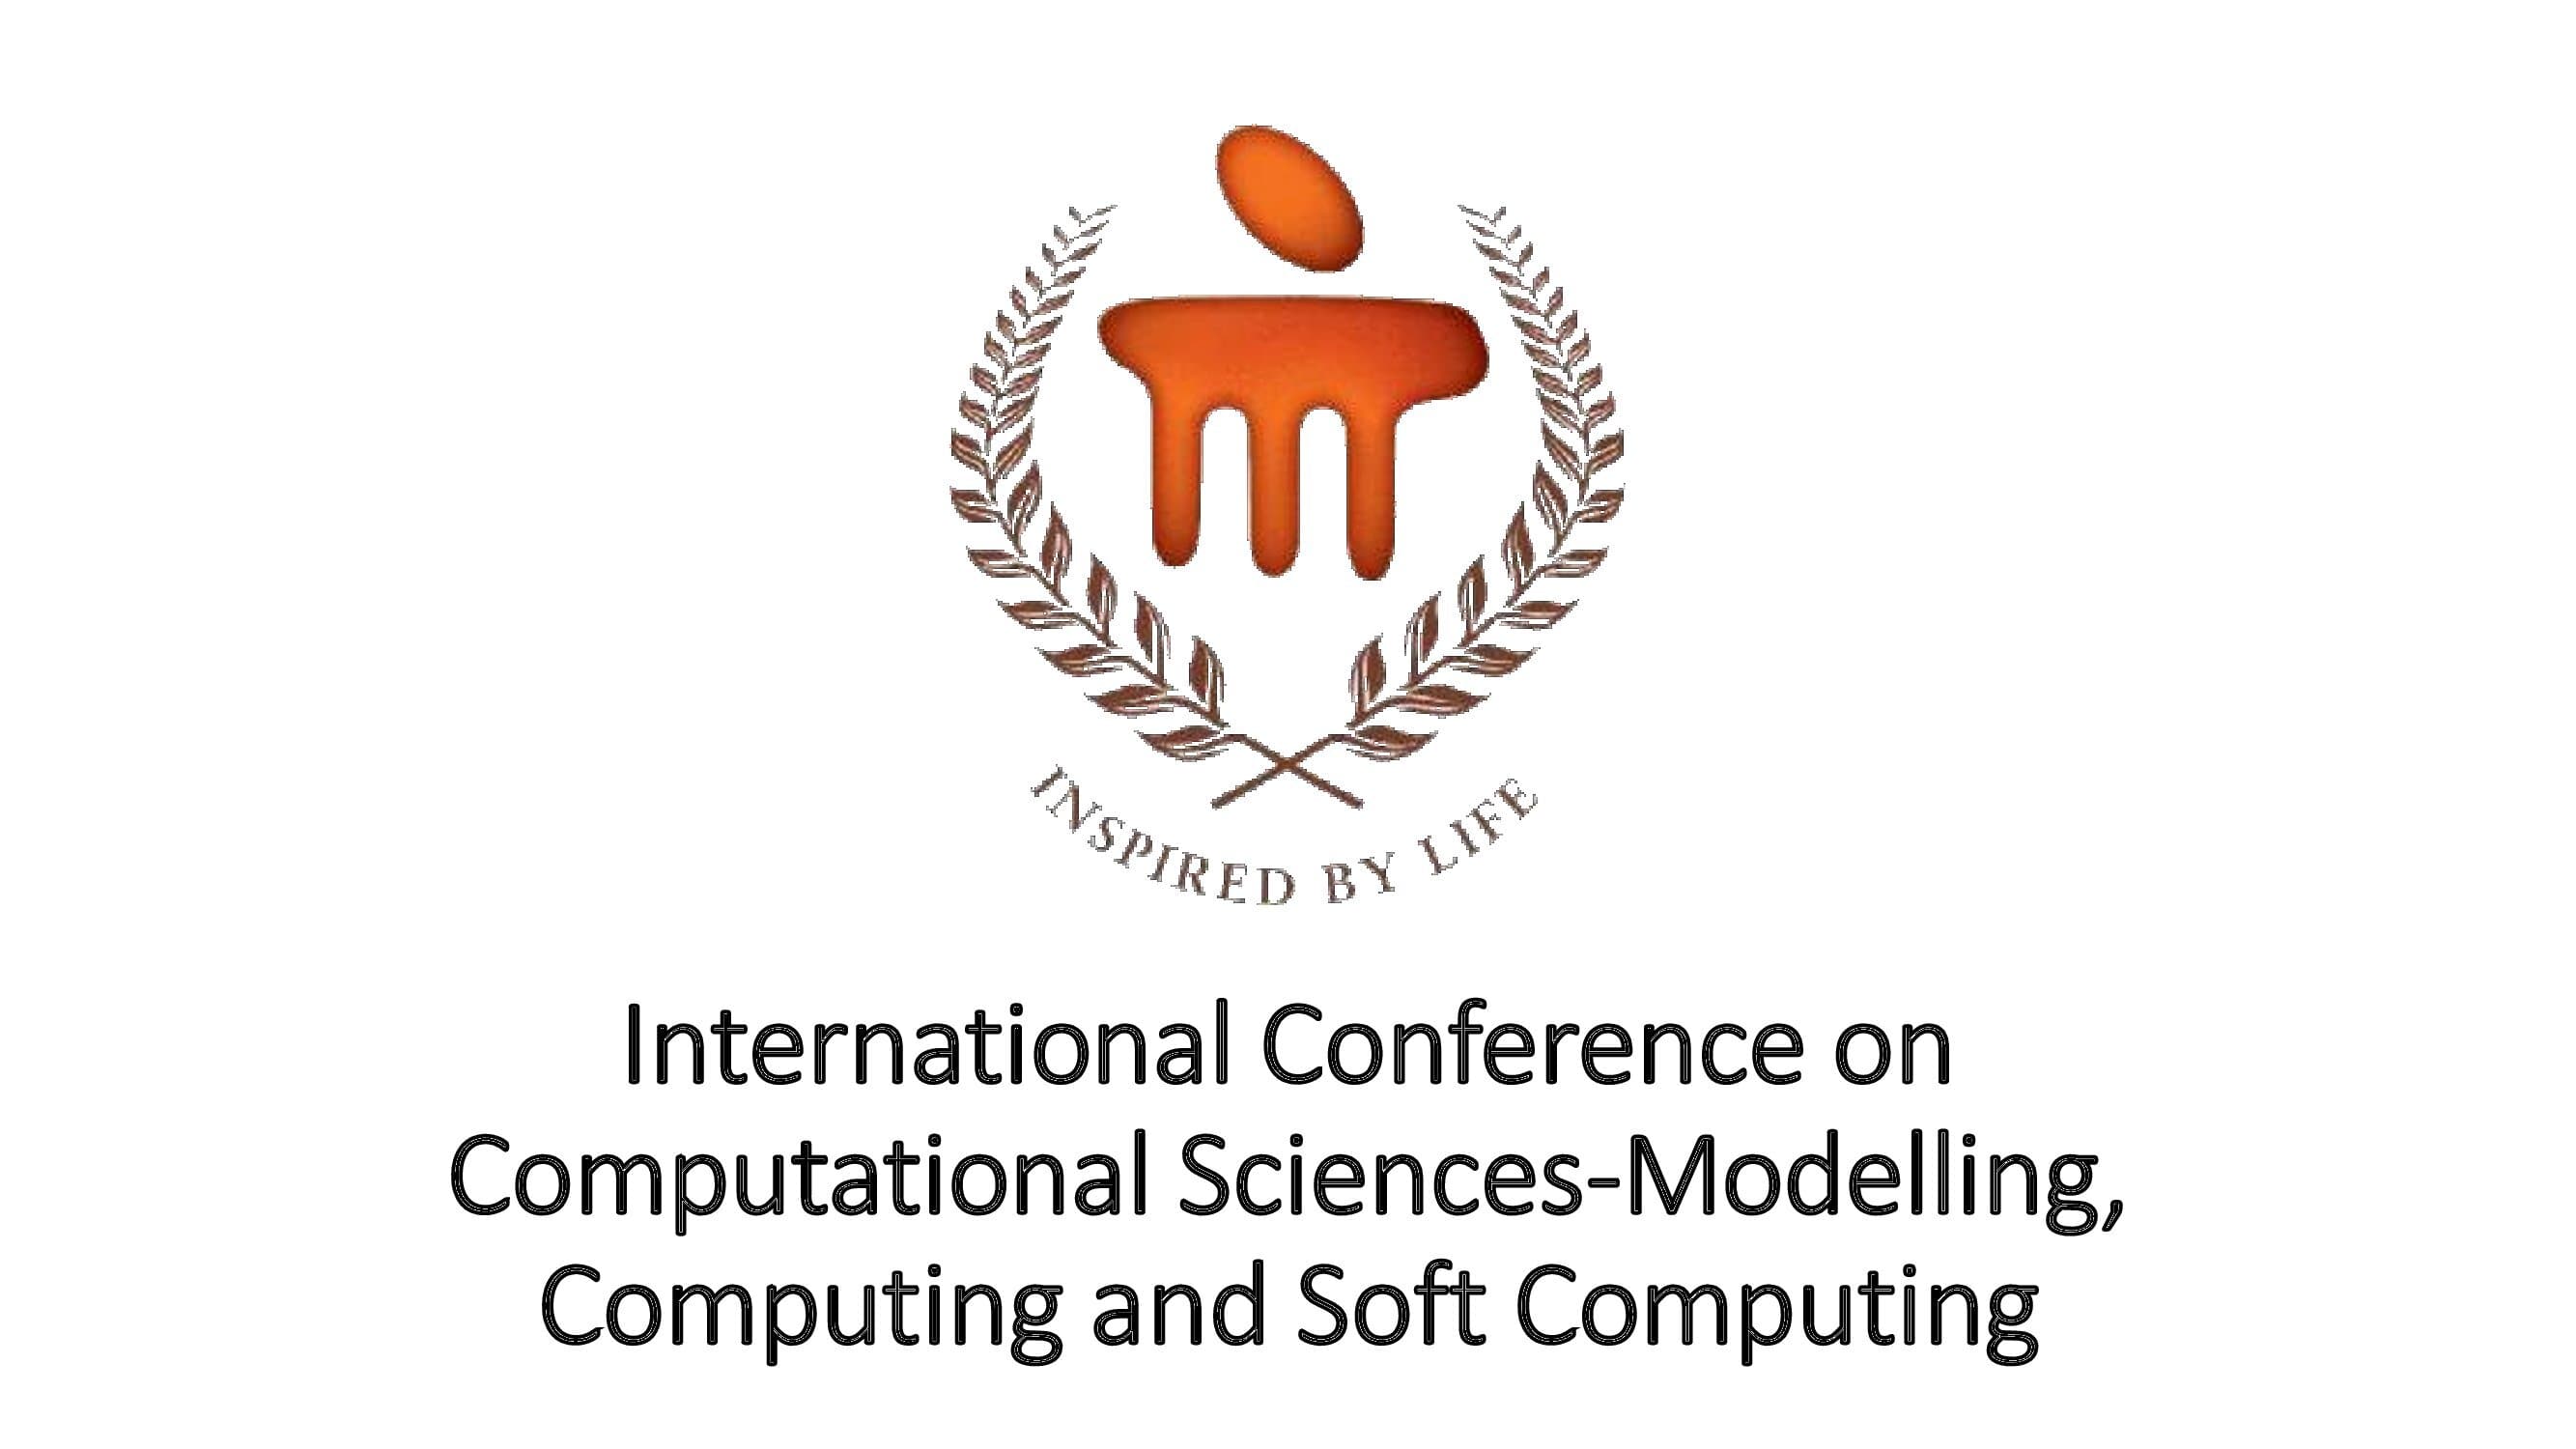 International Conference on Computational Sciences-Modelling, Computing and Soft Computing (CSMCS-2022)